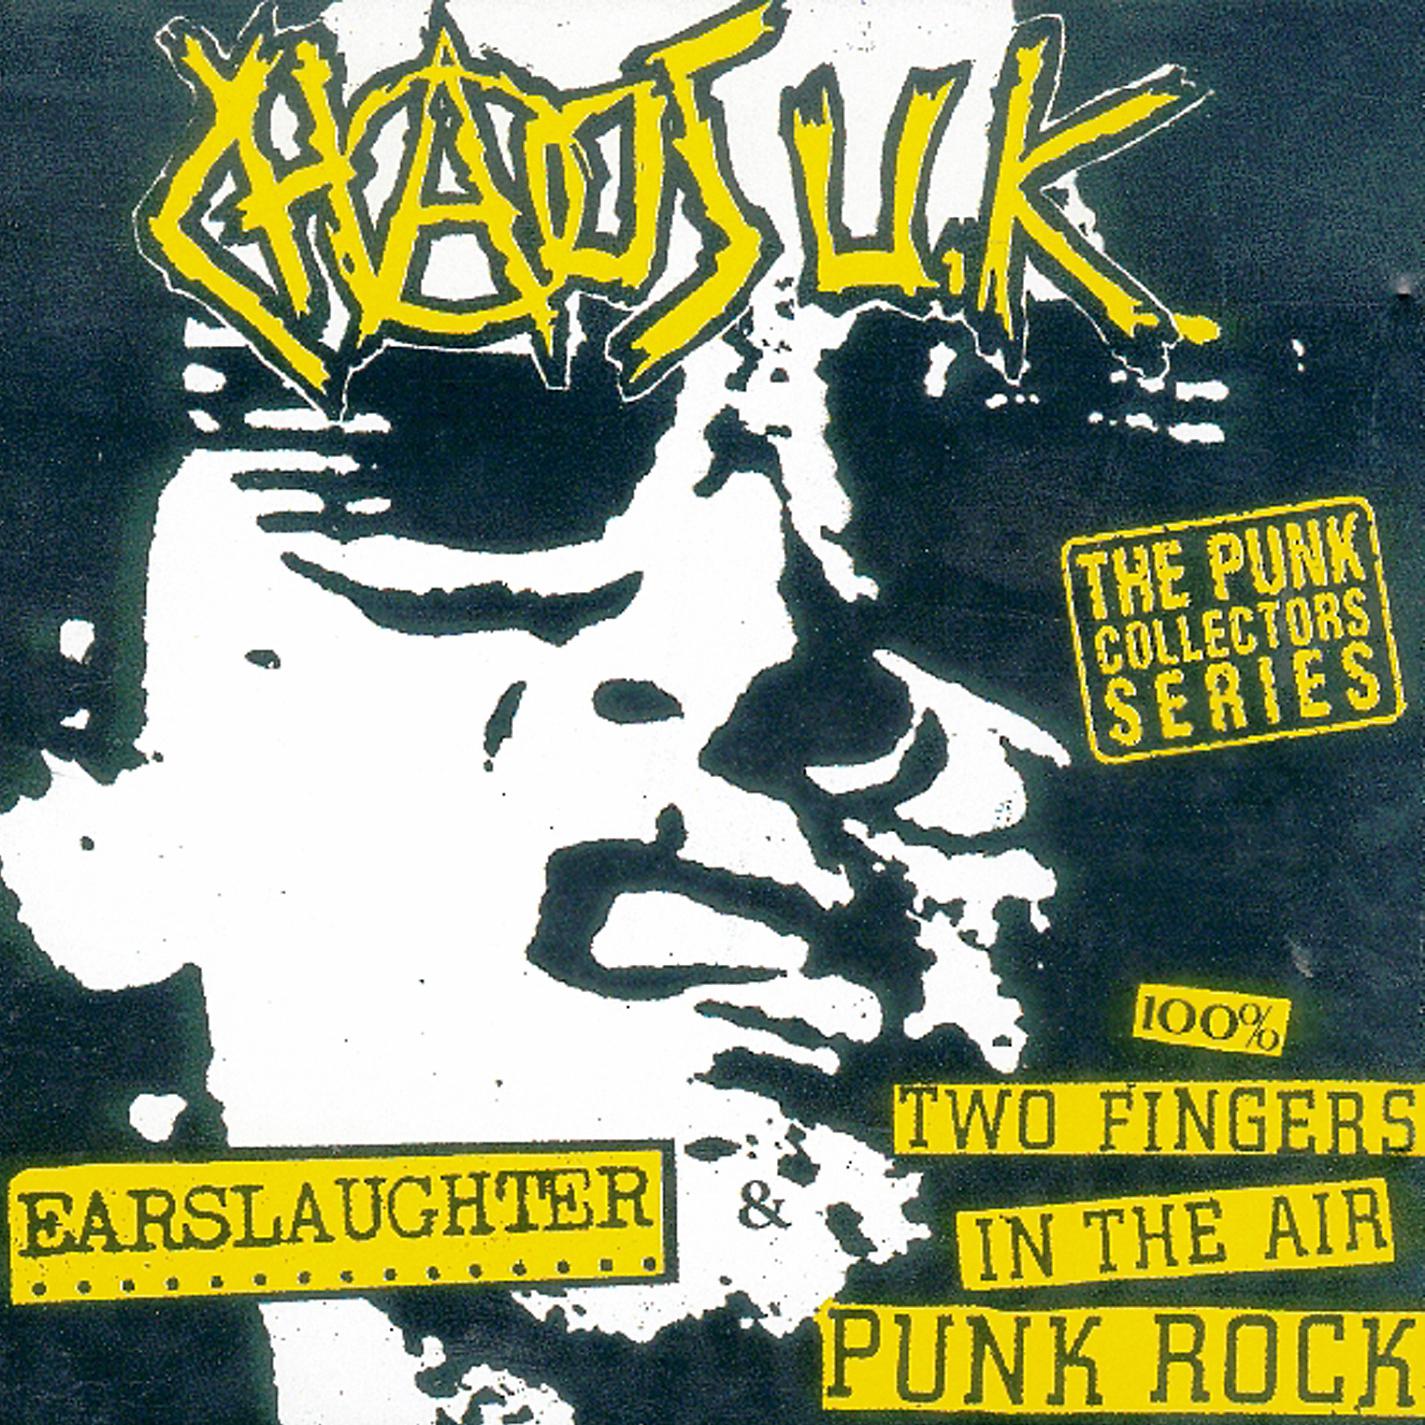 Постер альбома Radio Earslaughter / 100% 2 Fingers in the Air Punk Rock